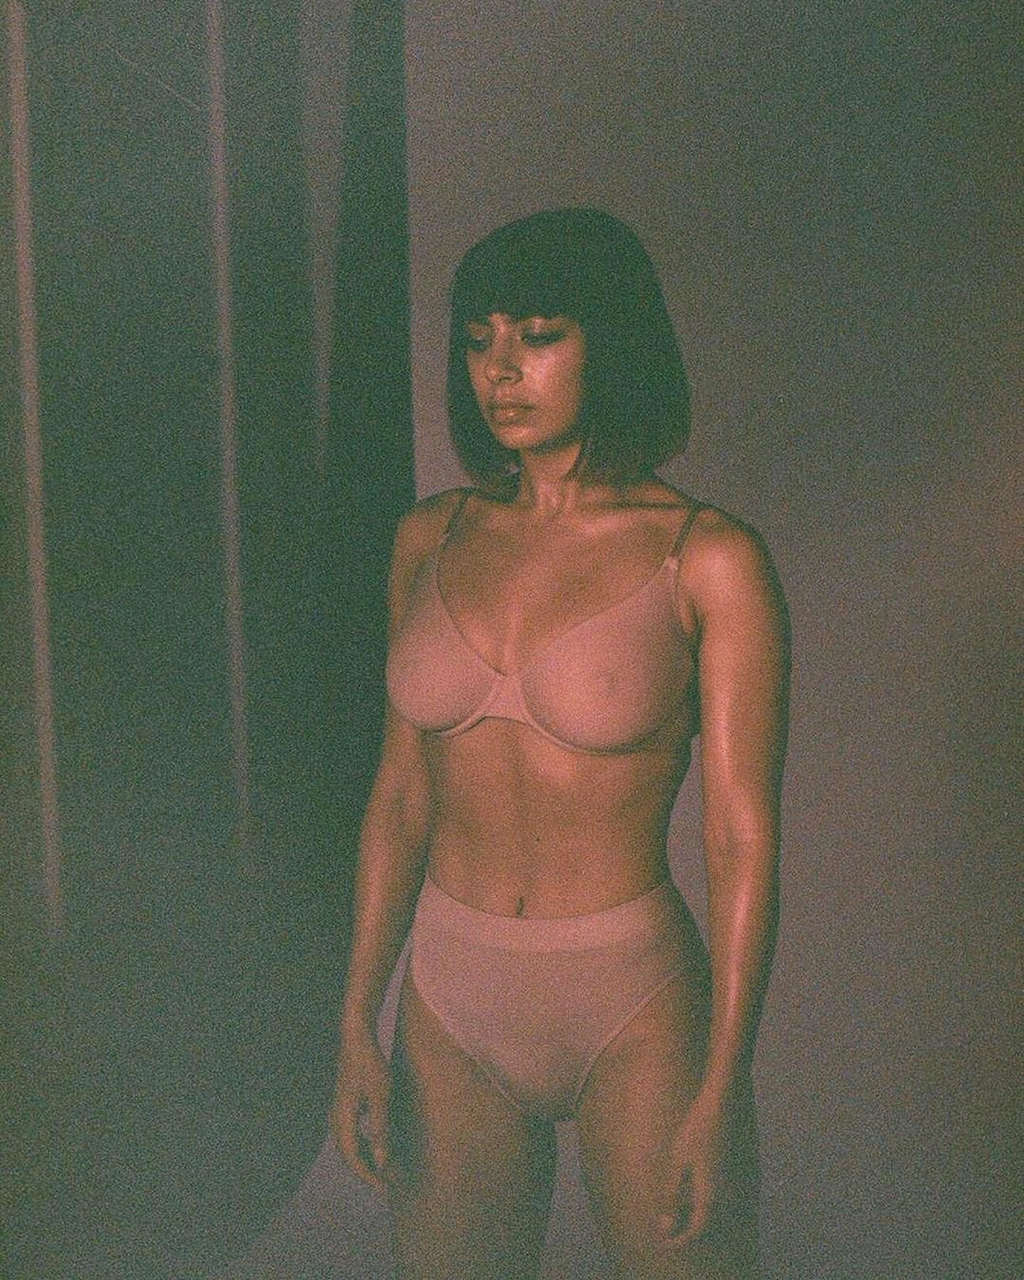 Charlie Xcx NSFW